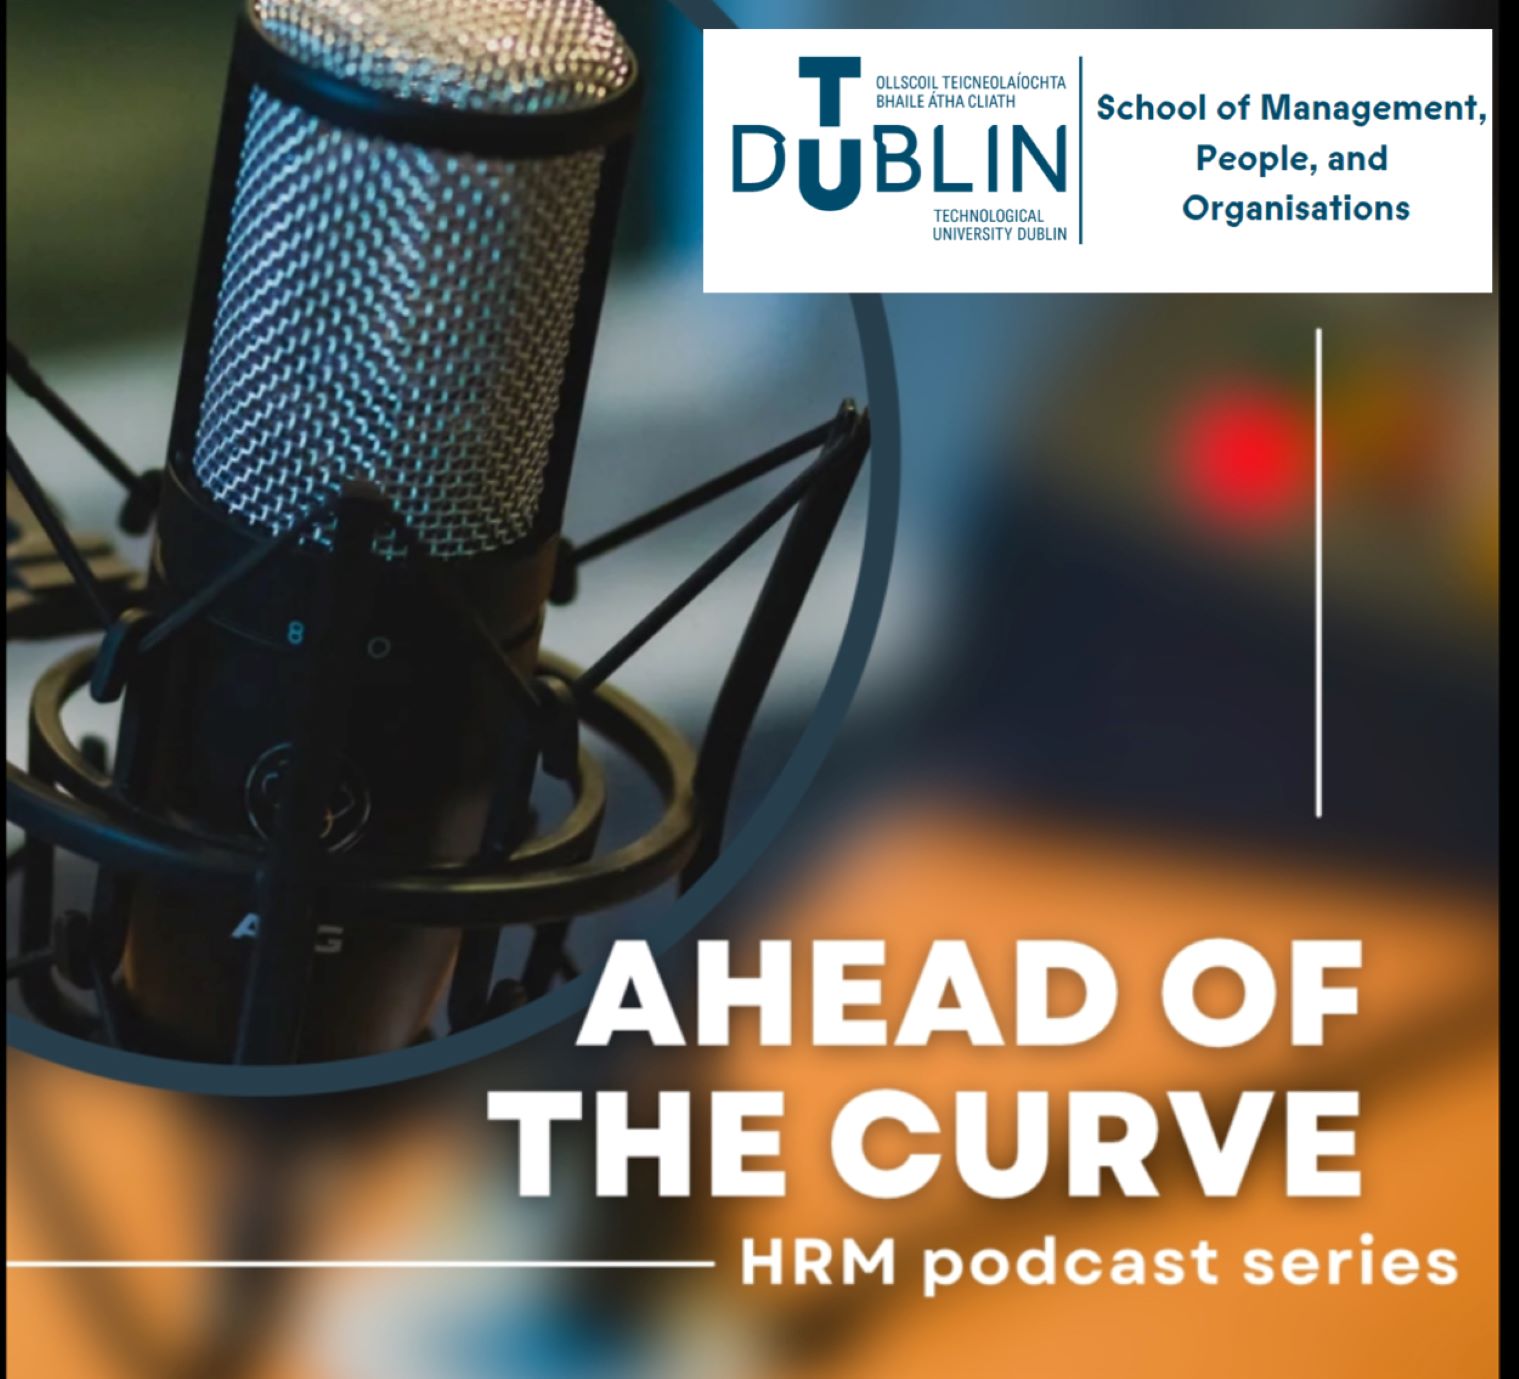 Ahead of the Curve is a HRM podcast from the School of Management, People and Organisations at Technological University (TU) Dublin. Throughout this series, Ann Masterson (Head of Discipline) and Ciara Nolan (HRM Lecturer) will be joined by industry experts to talk about the landscape of human resources, our current challenges, and our future directions.... keeping you ahead of the curve in all th